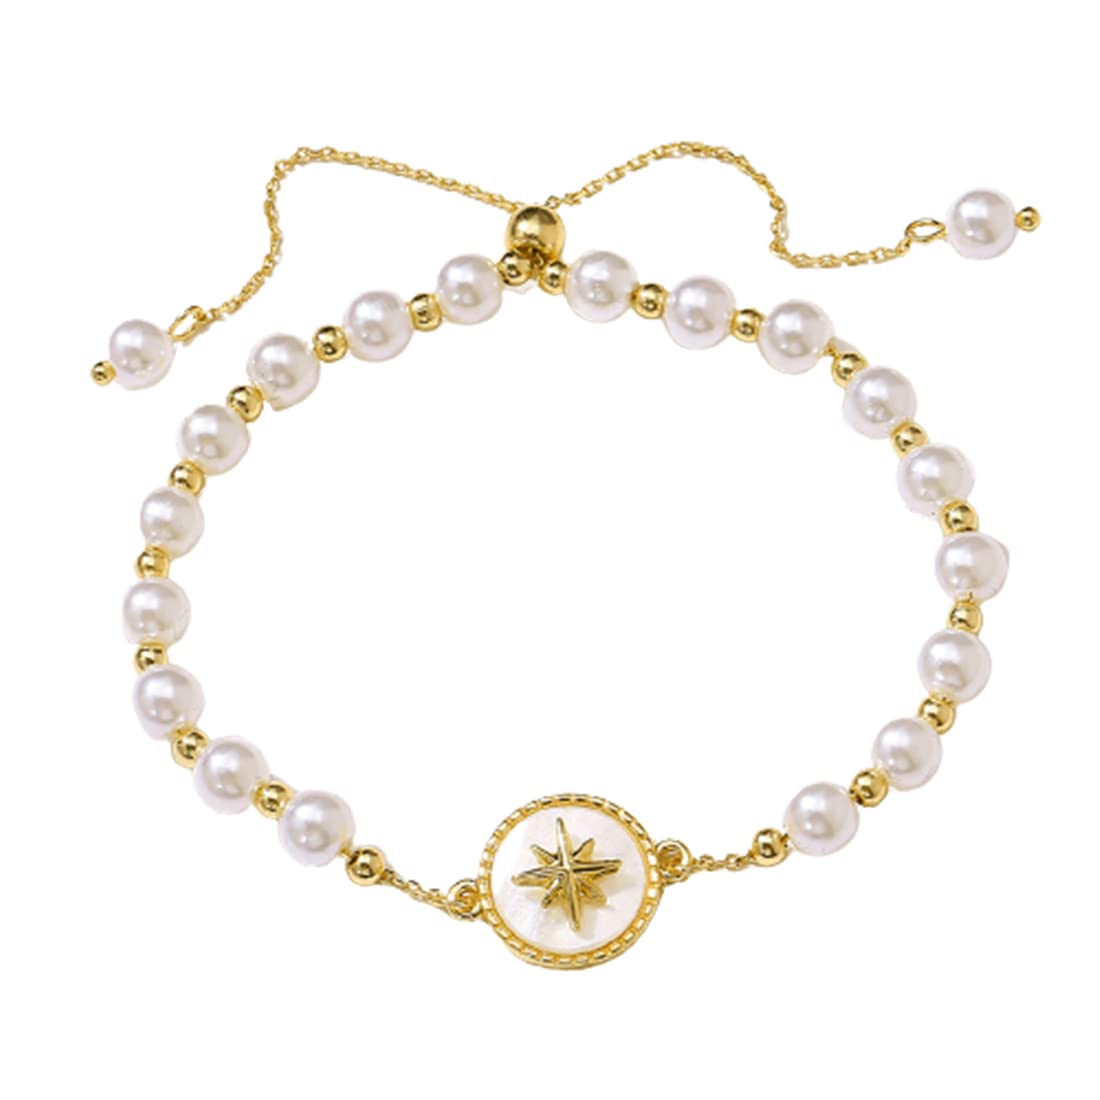 Yellow Chimes Bracelet For Women Gold Tone Pearl Beaded Adjustable With Centre Charm Bracelet For Women and Girls